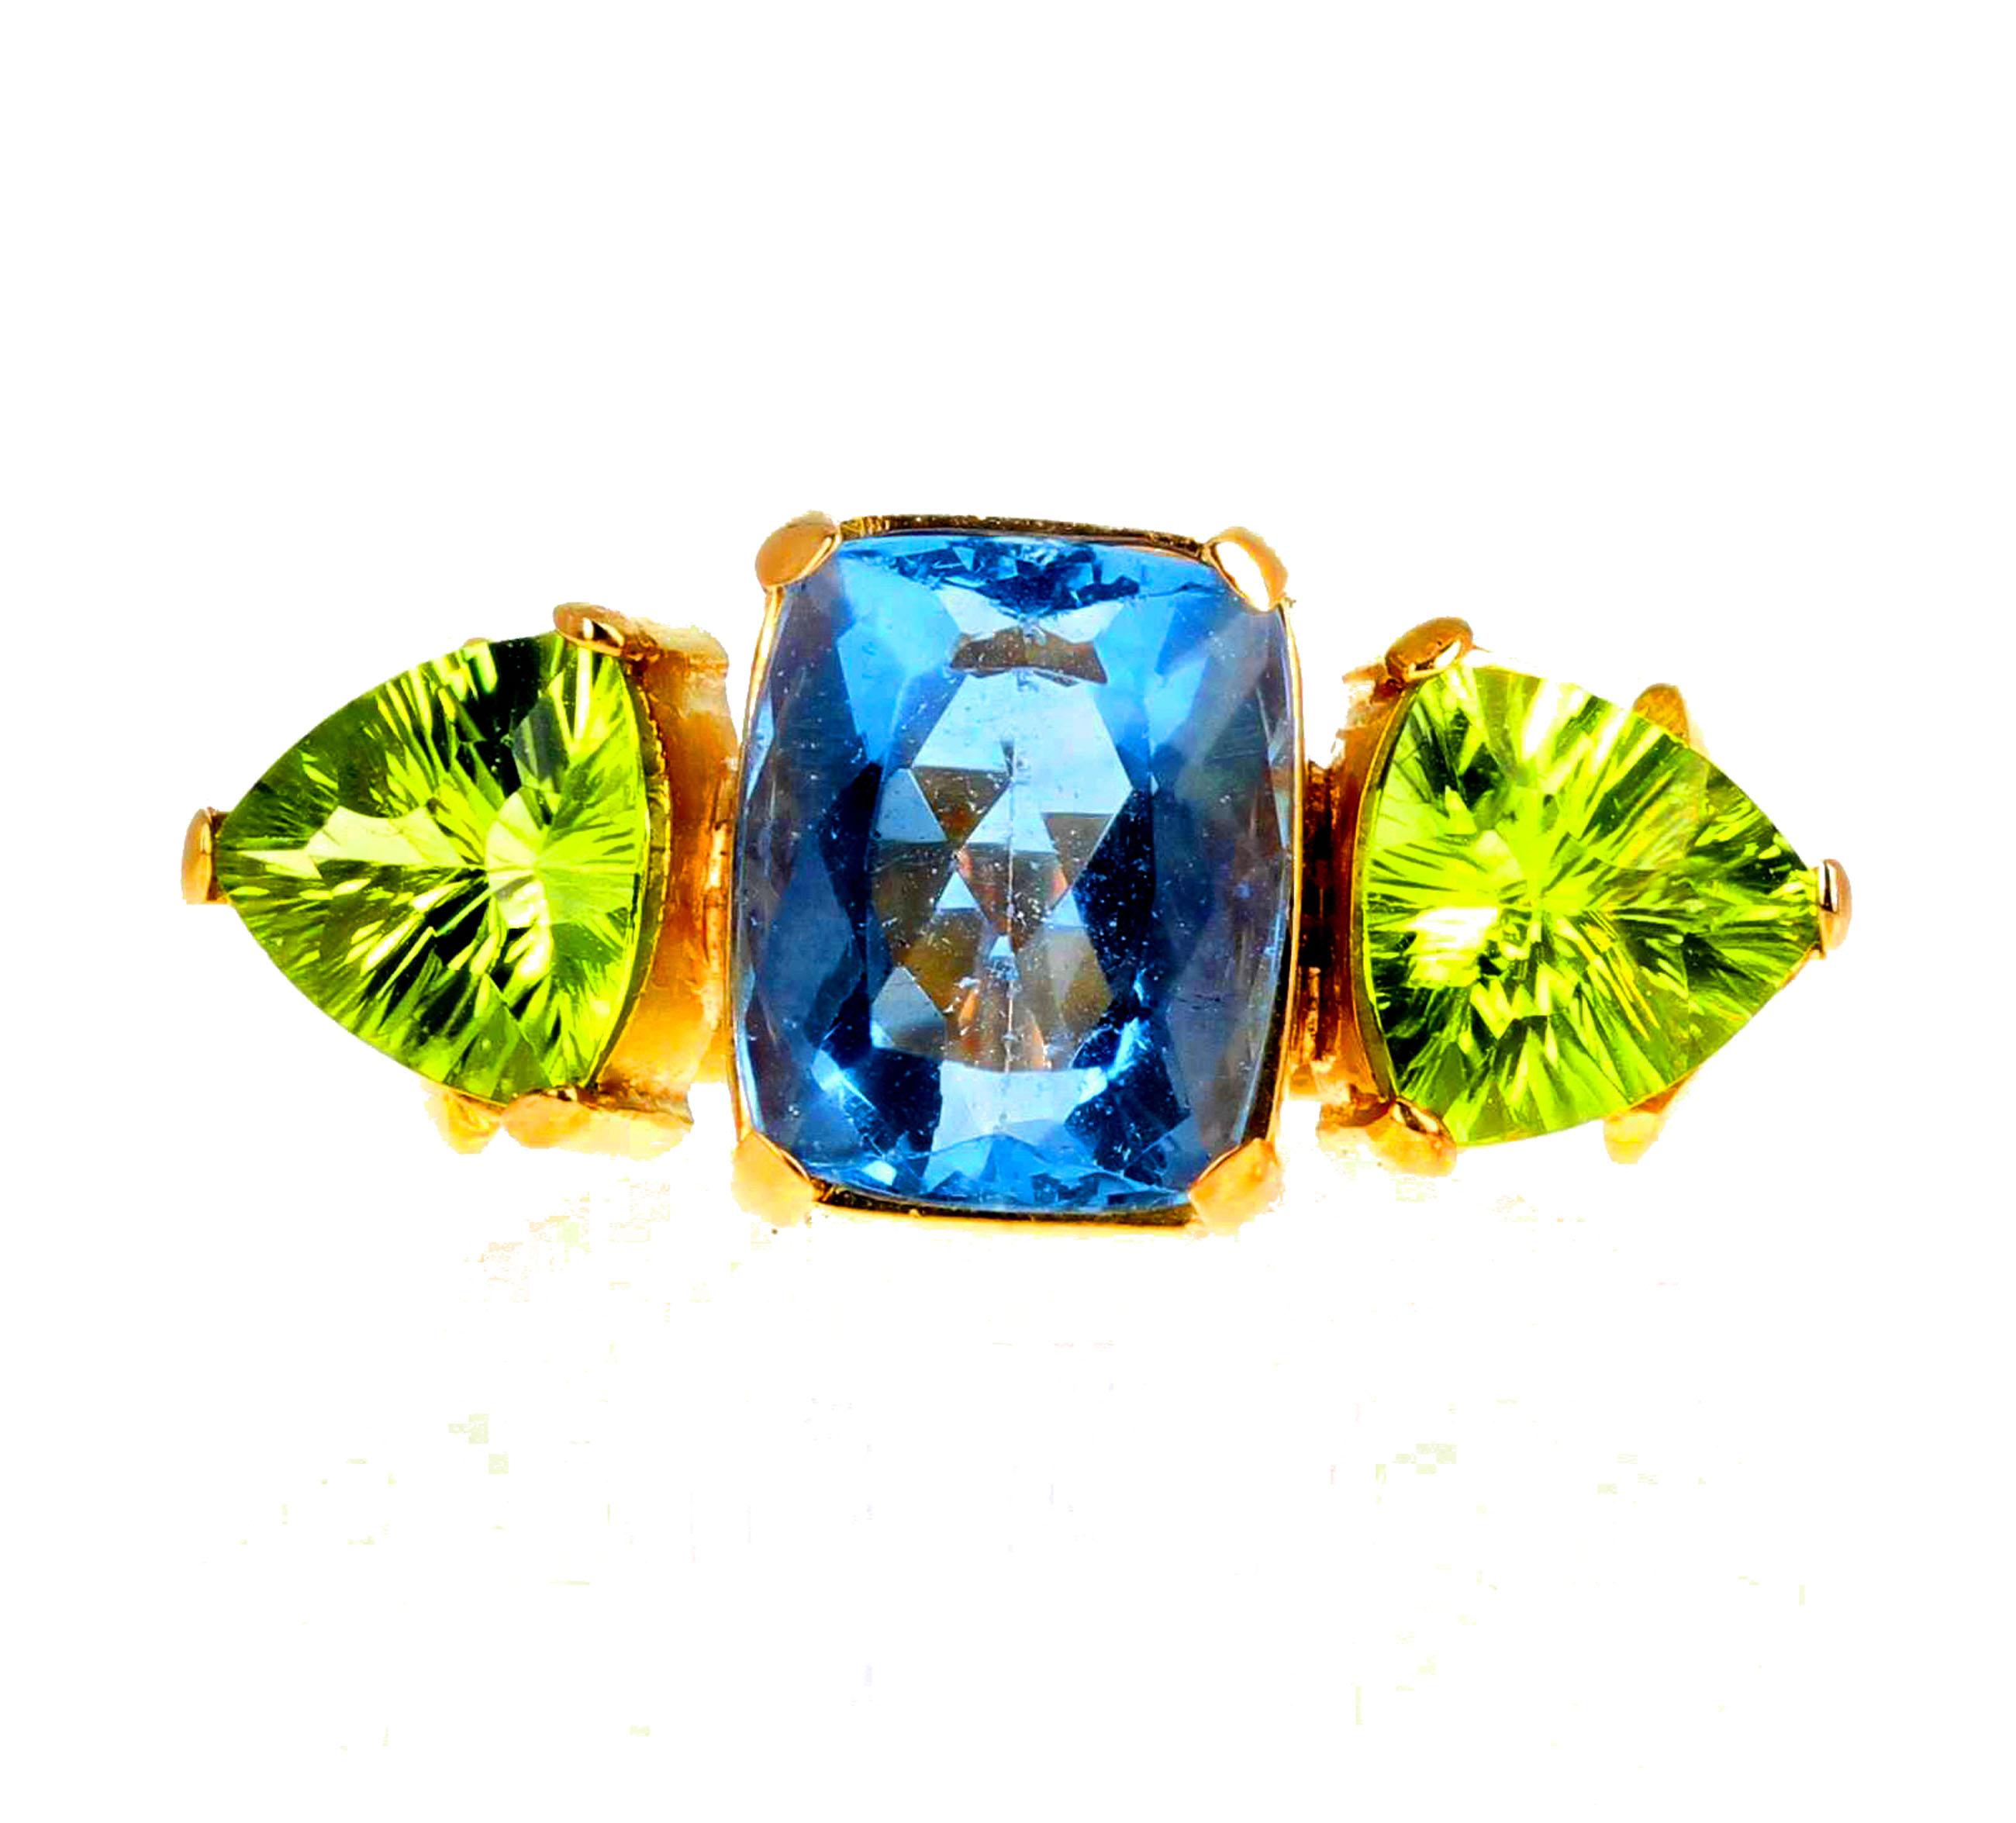 This is truly a magic ring as it plays tricks with the color change based on the lighting.  The color can go from blue to pinky blue in this clear 5 carat Fluorite (12mm x 9 mm). The natural Peridot are approximately 2.4 carats each (9 mm x 9 mm). 